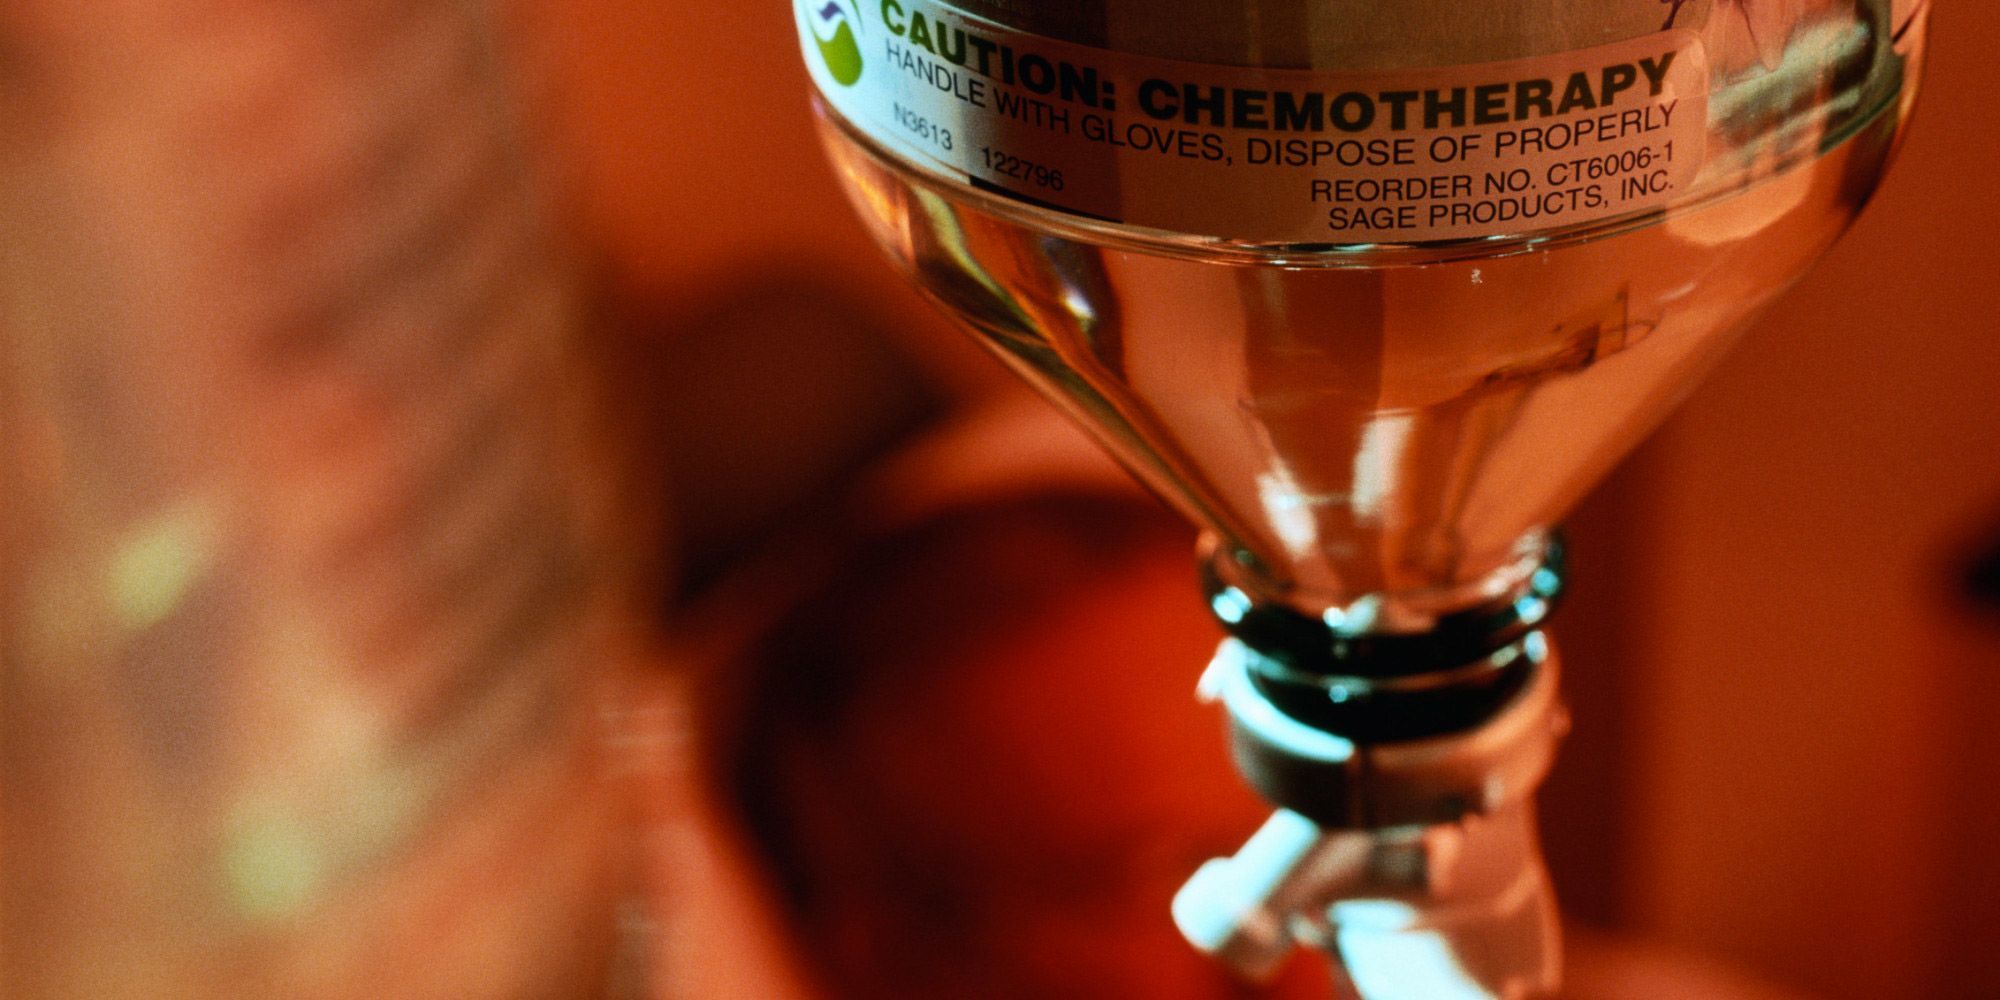 3 natural approaches to chemotherapy side effects 